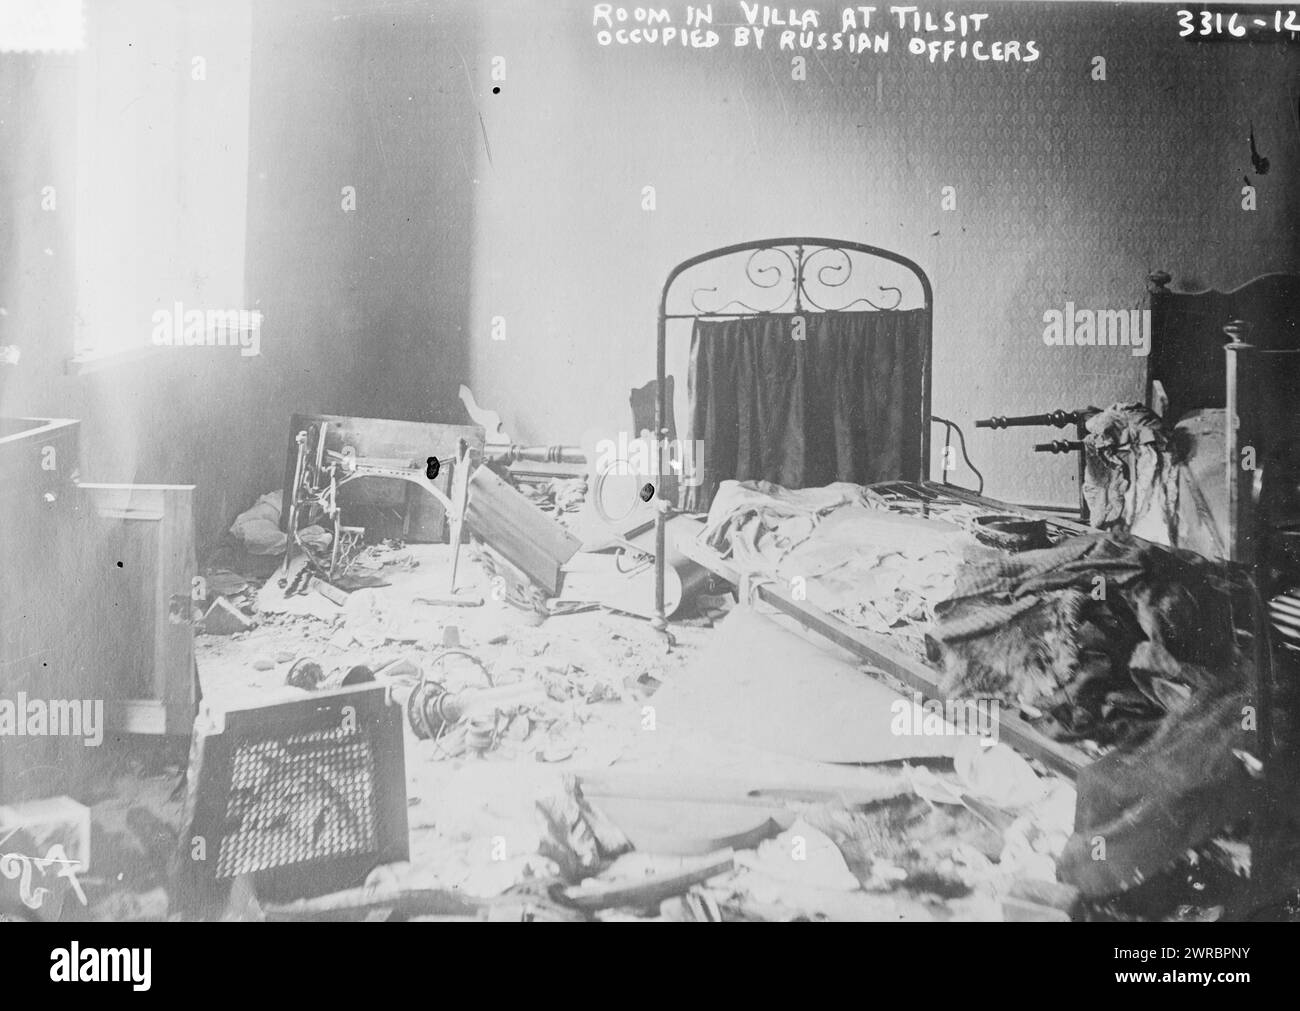 Room in villa at Tilsit occupied by Russian officers, Photograph shows a room in a villa occupied by Russian soldiers during World War I, in Sovetsk (Tilsit), Russia., between ca. 1914 and ca. 1915, World War, 1914-1918, Glass negatives, 1 negative: glass Stock Photo